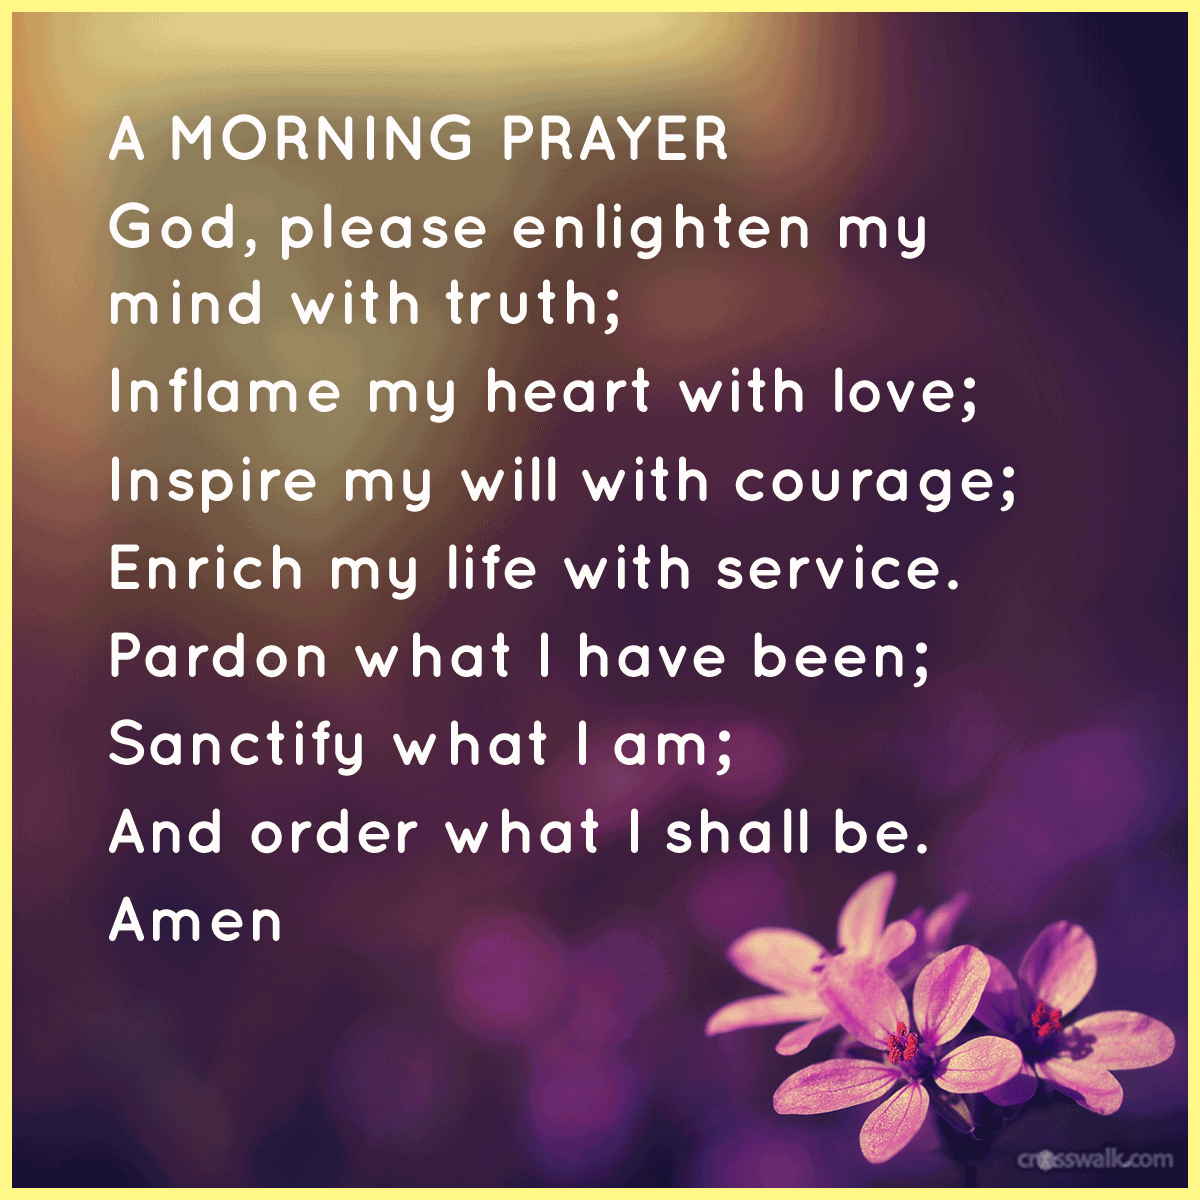 25 Good Morning Quotes Prayer Images & Pictures